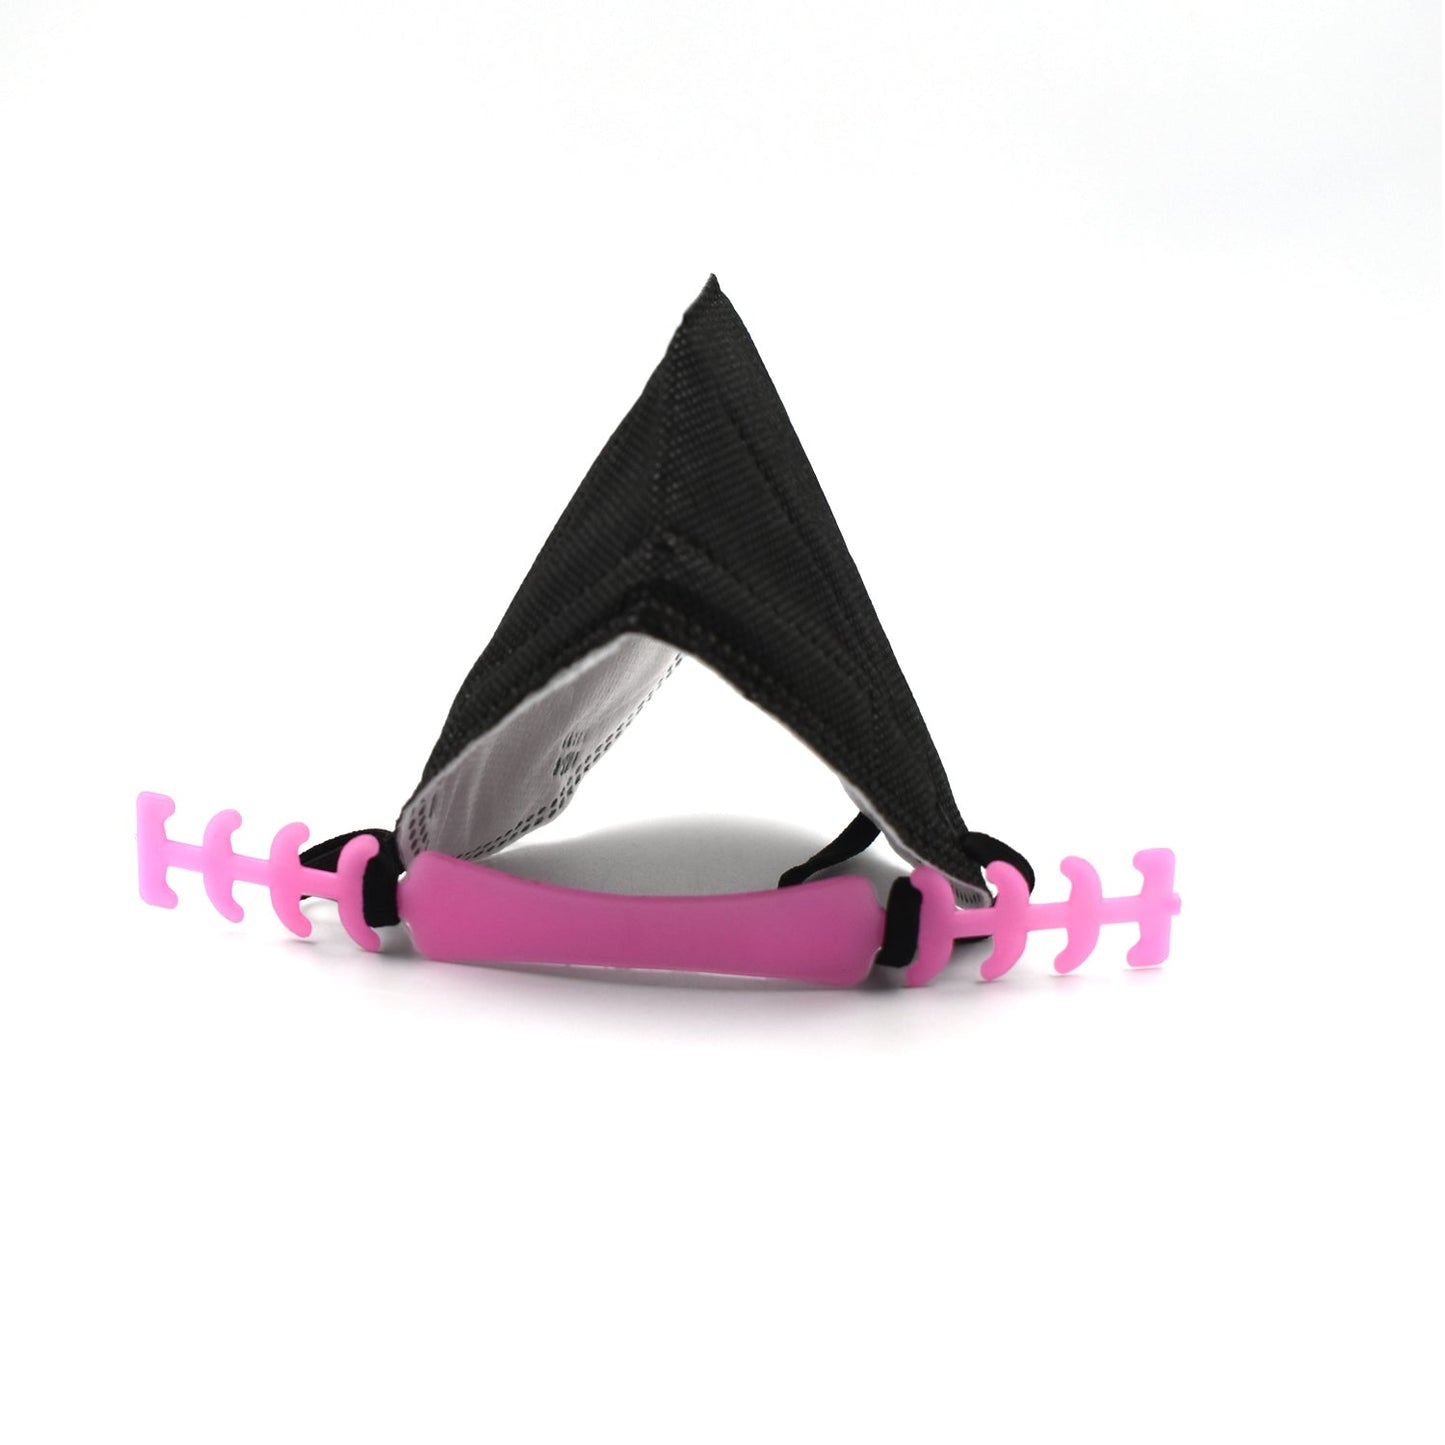 Mask Extension Belt and strap Used for extended face mask string to get rid from pain in ear